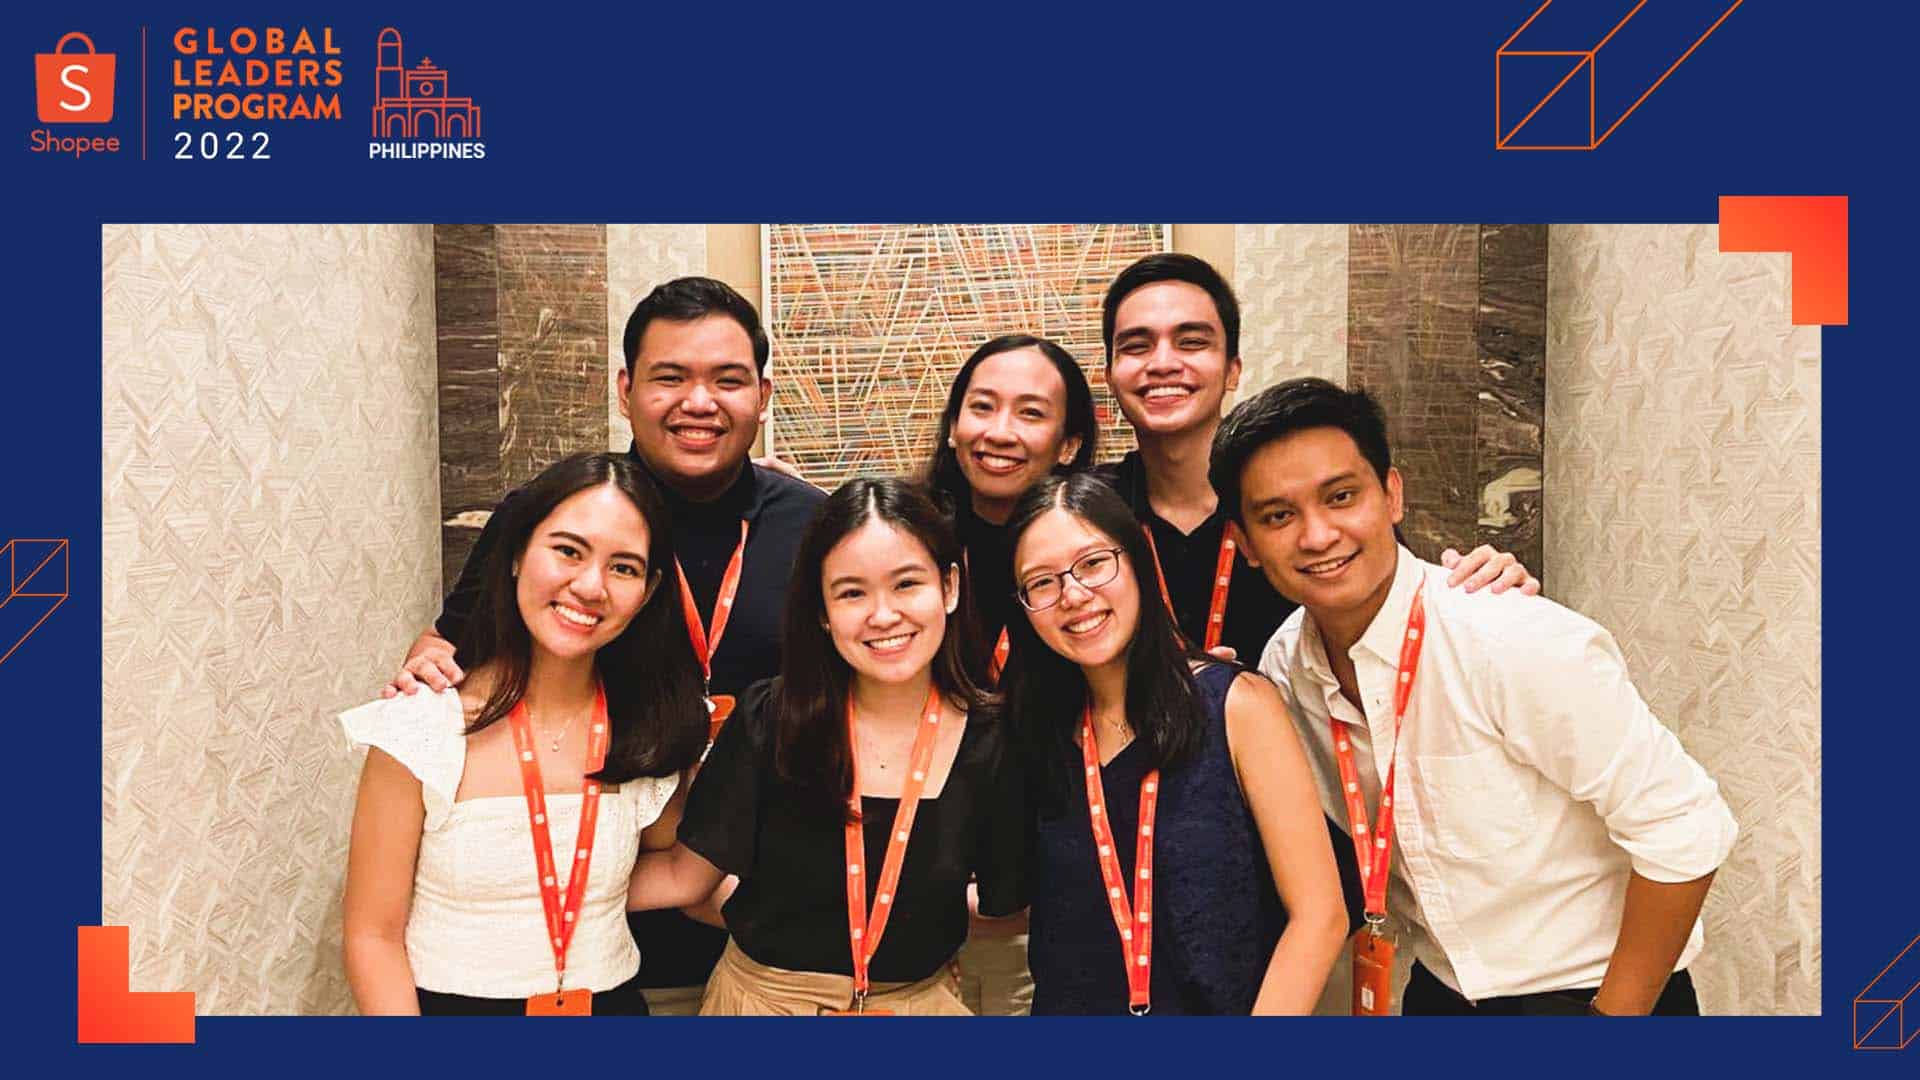 Shaping Future Filipino Tech Leaders with Shopee’s Global Leaders Program